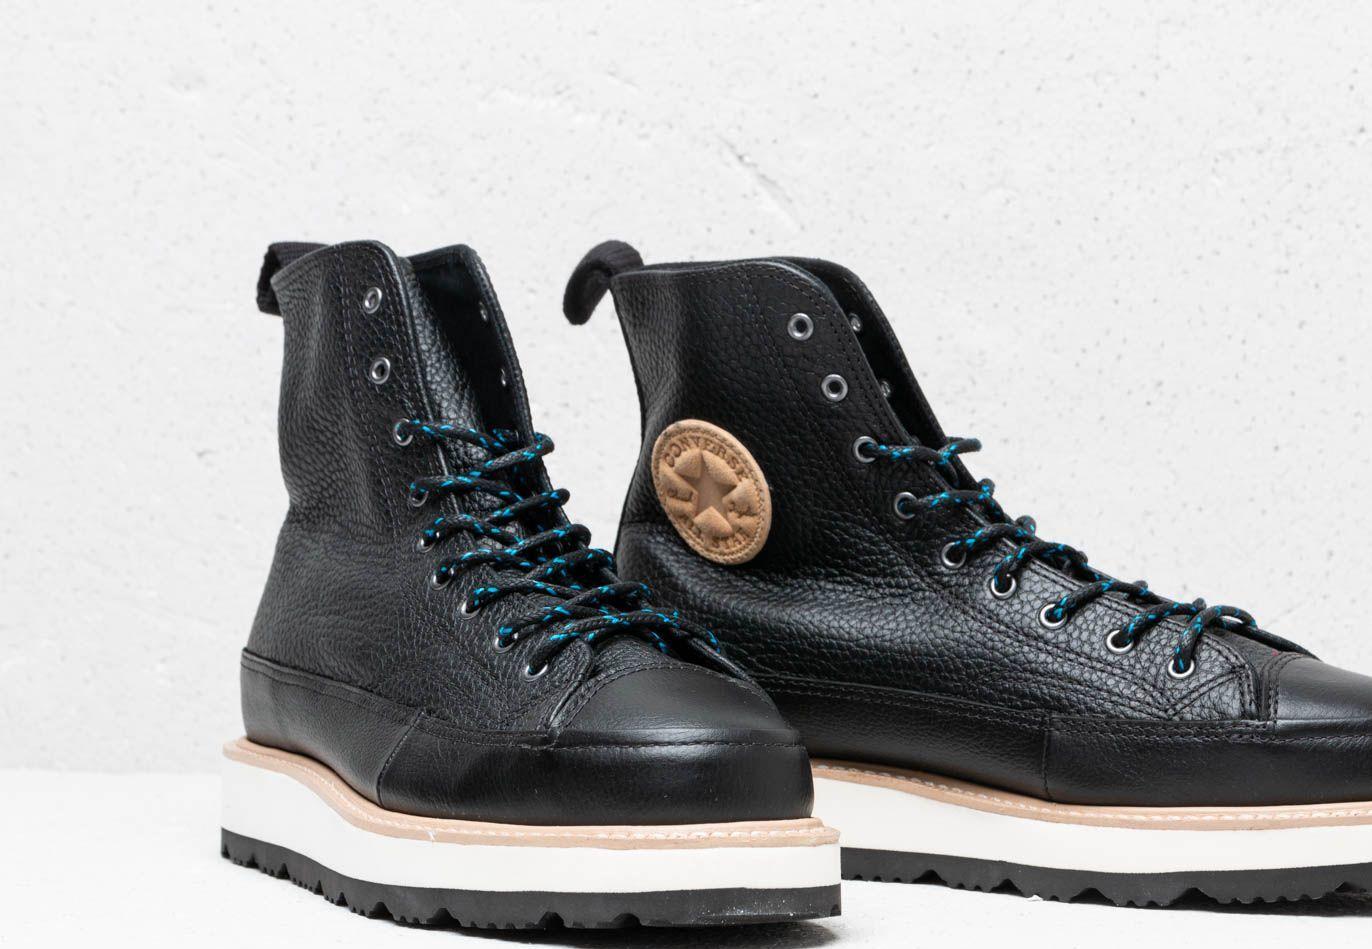 Converse Chuck Taylor Crafted Boot High Black/ Light Fawn/ Black | Lyst